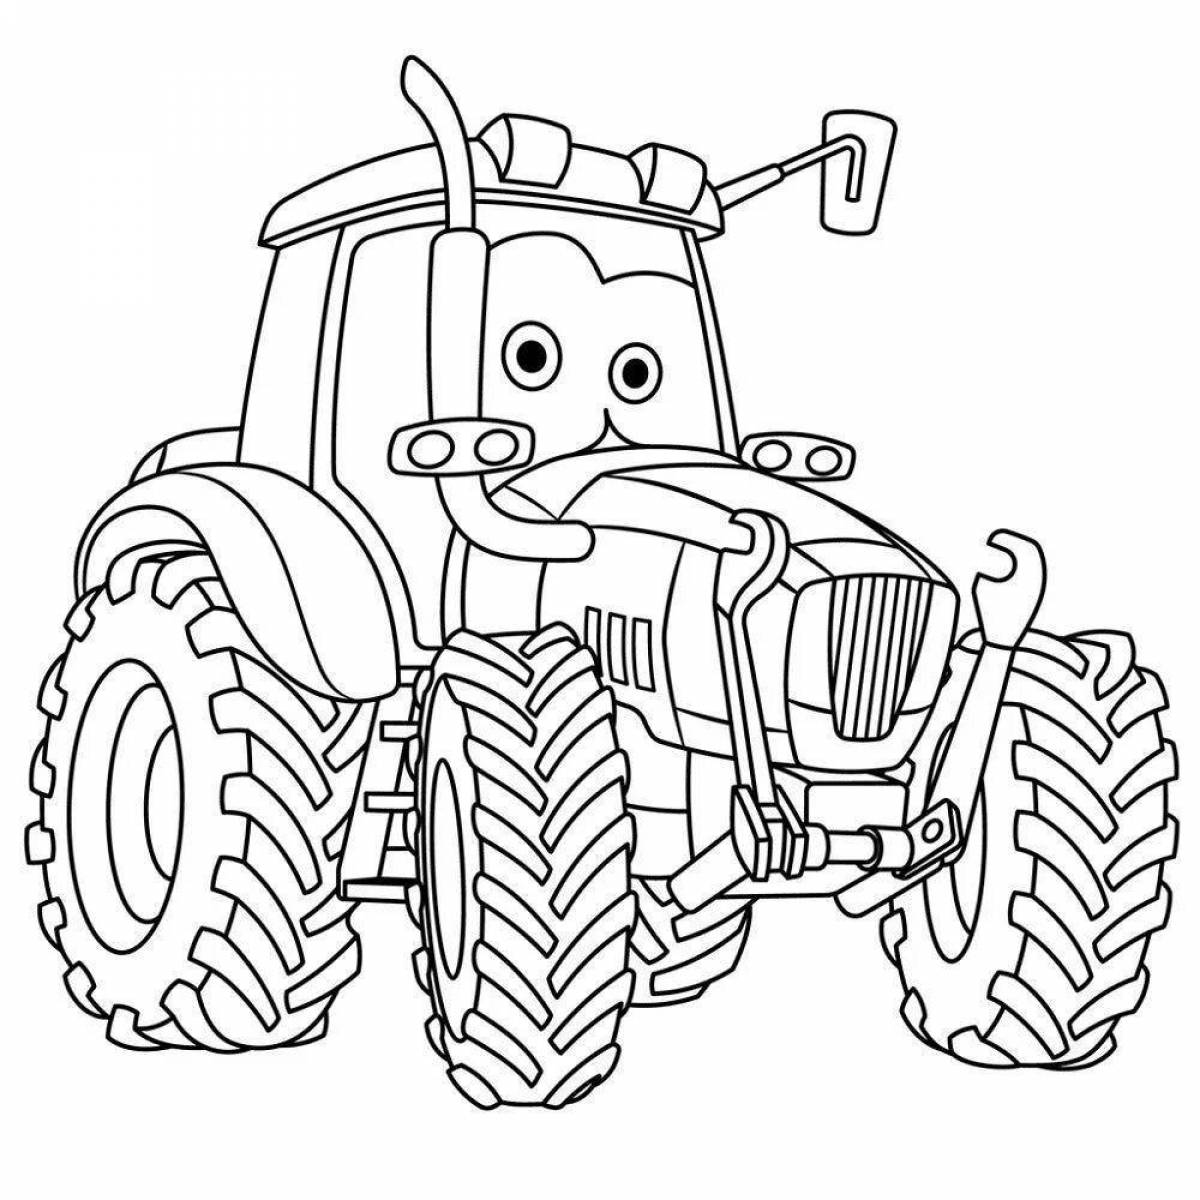 Adorable blue gosh tractor coloring page